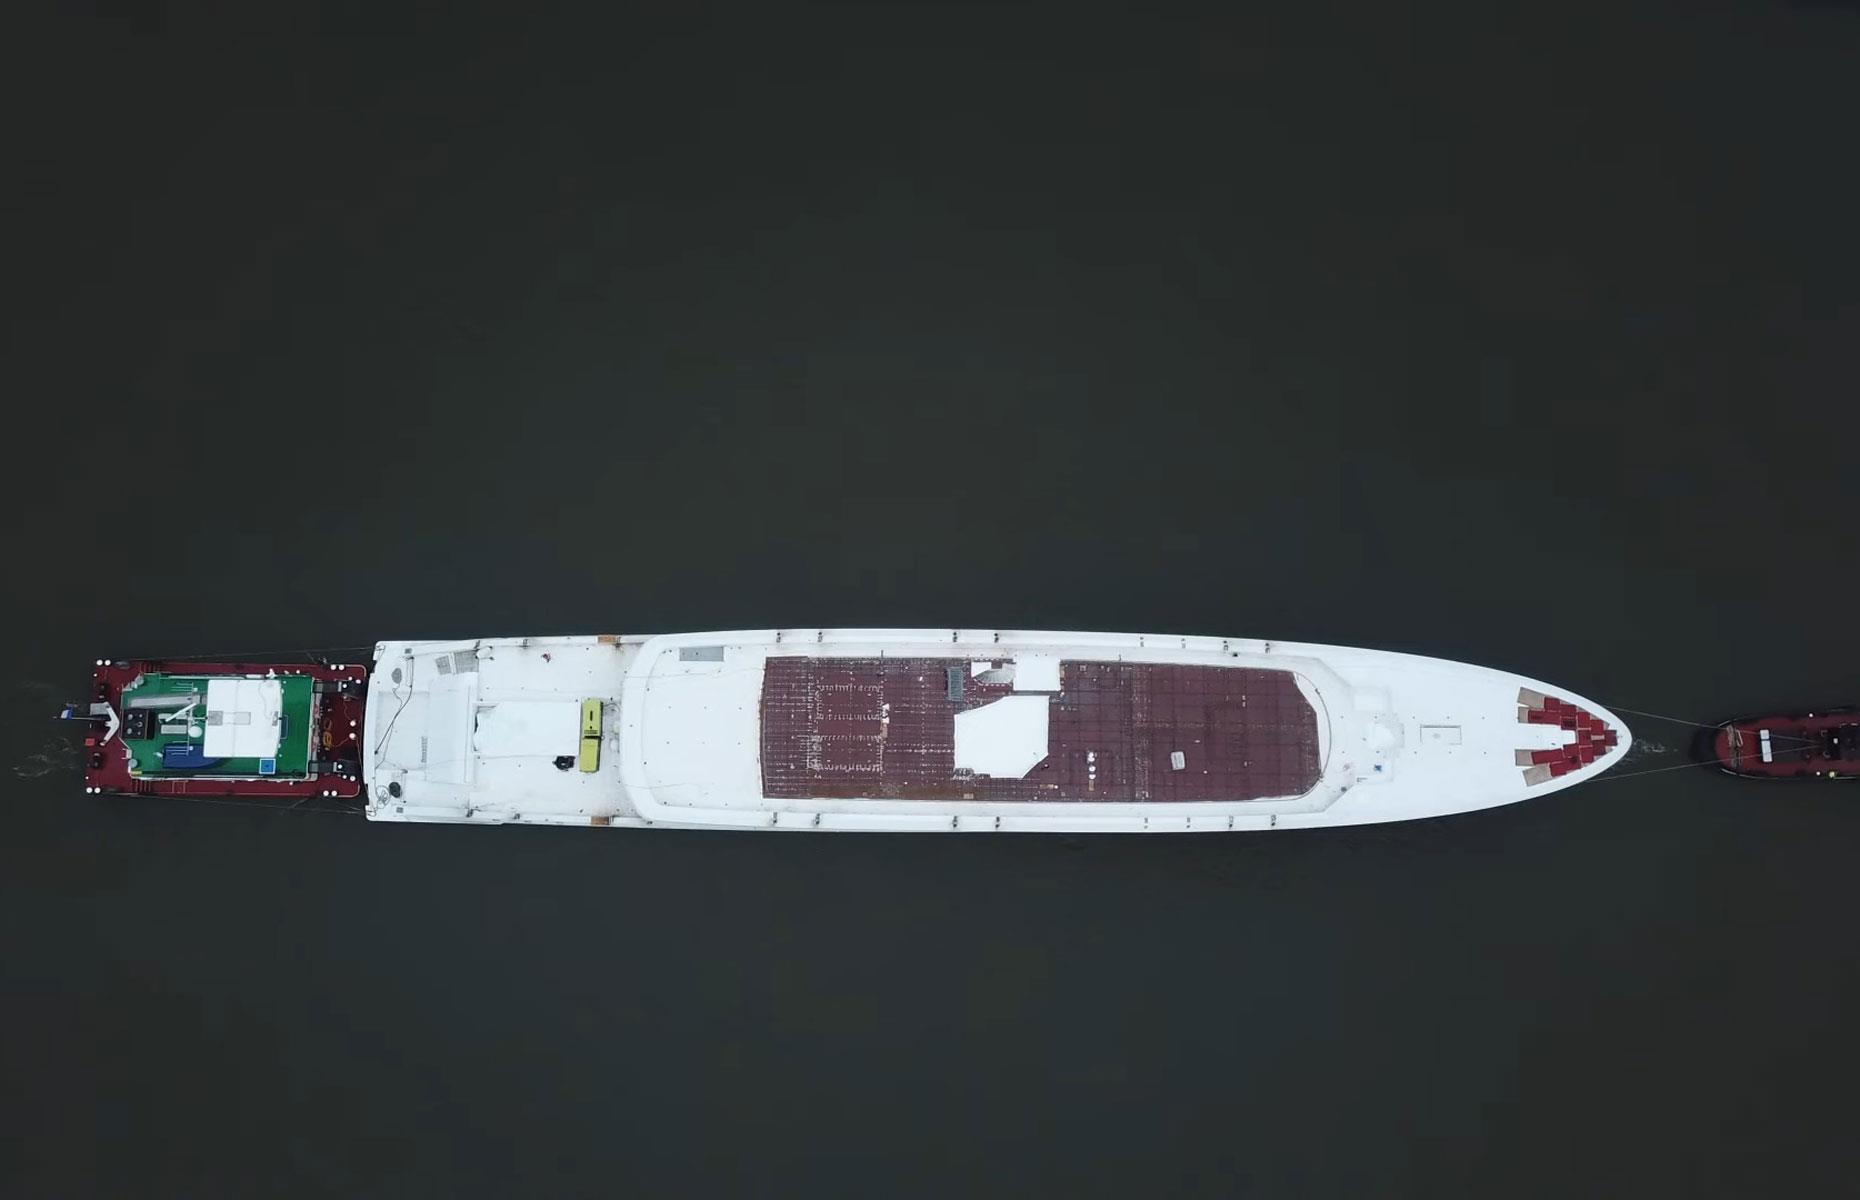 <p>With the venture cloaked in mystery, Feadship hasn't released any renders of <em>Project 1012</em> and has yet to disclose information about the team behind it.</p>  <p>Based on images of the vessel undergoing trials in December 2022, <em>Megayacht News</em> has speculated that it could be traditional in design and may feature a beach club. However, these details won't be confirmed until the superyacht is delivered sometime this year – so watch this space...</p>